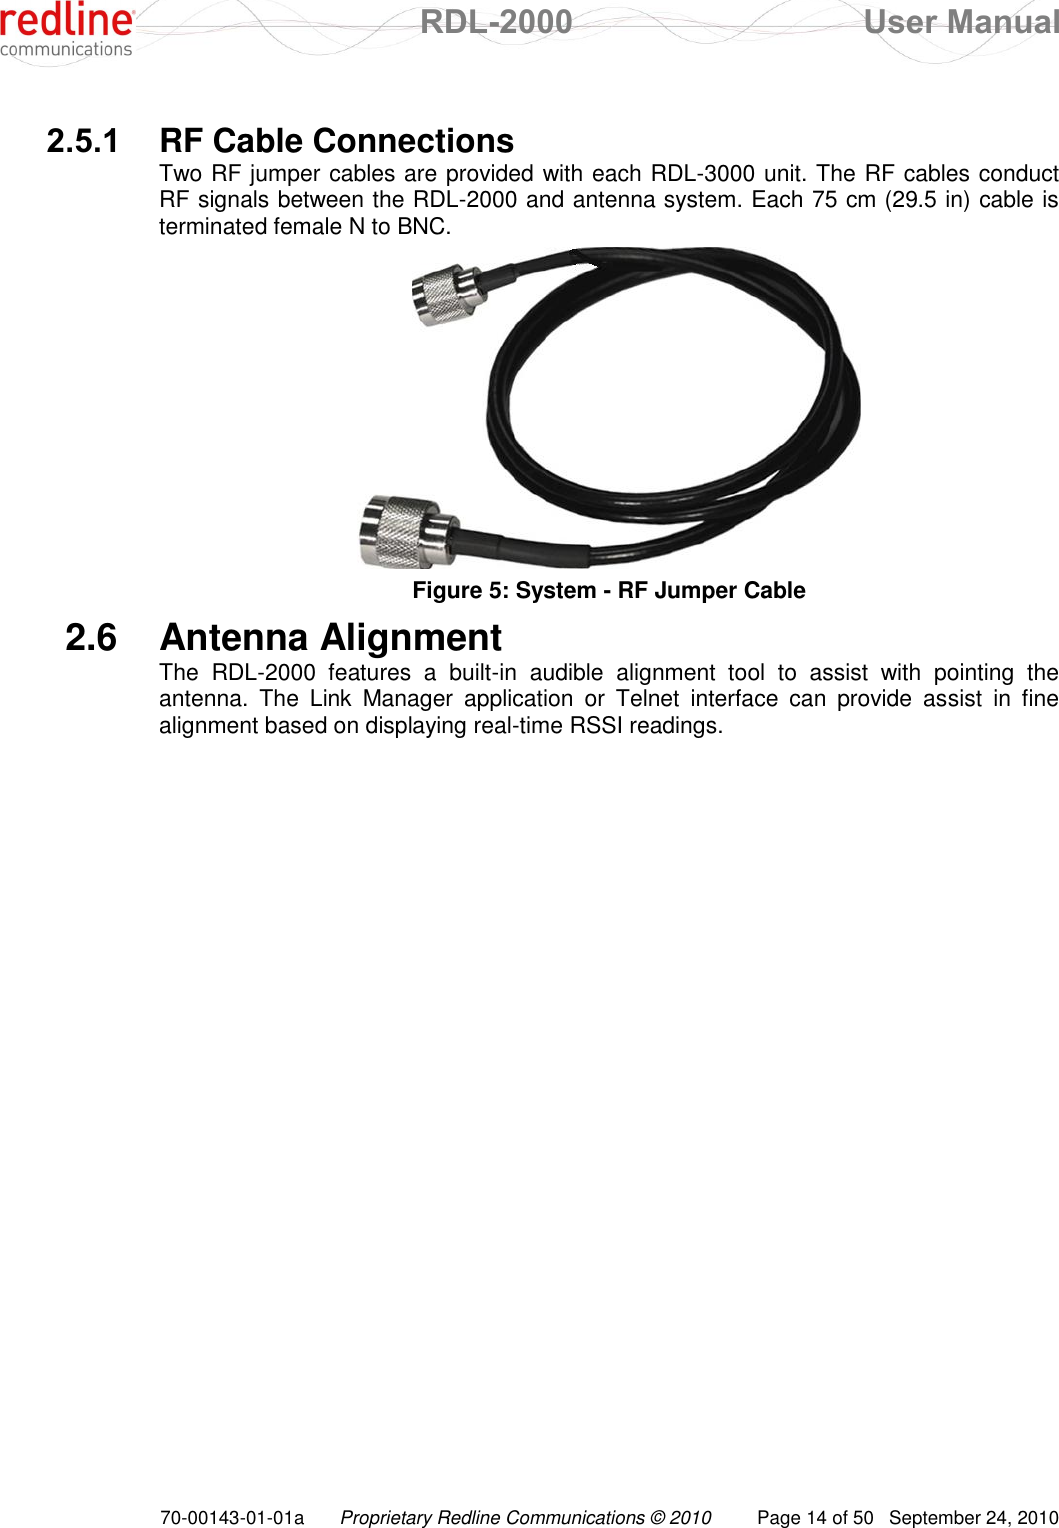  RDL-2000  User Manual 70-00143-01-01a Proprietary Redline Communications © 2010  Page 14 of 50  September 24, 2010  2.5.1  RF Cable Connections Two RF jumper cables are provided with each RDL-3000 unit. The RF cables conduct RF signals between the RDL-2000 and antenna system. Each 75 cm (29.5 in) cable is terminated female N to BNC.  Figure 5: System - RF Jumper Cable 2.6  Antenna Alignment The  RDL-2000  features  a  built-in  audible  alignment  tool  to  assist  with  pointing  the antenna.  The  Link  Manager  application  or  Telnet  interface  can  provide  assist  in  fine alignment based on displaying real-time RSSI readings.  